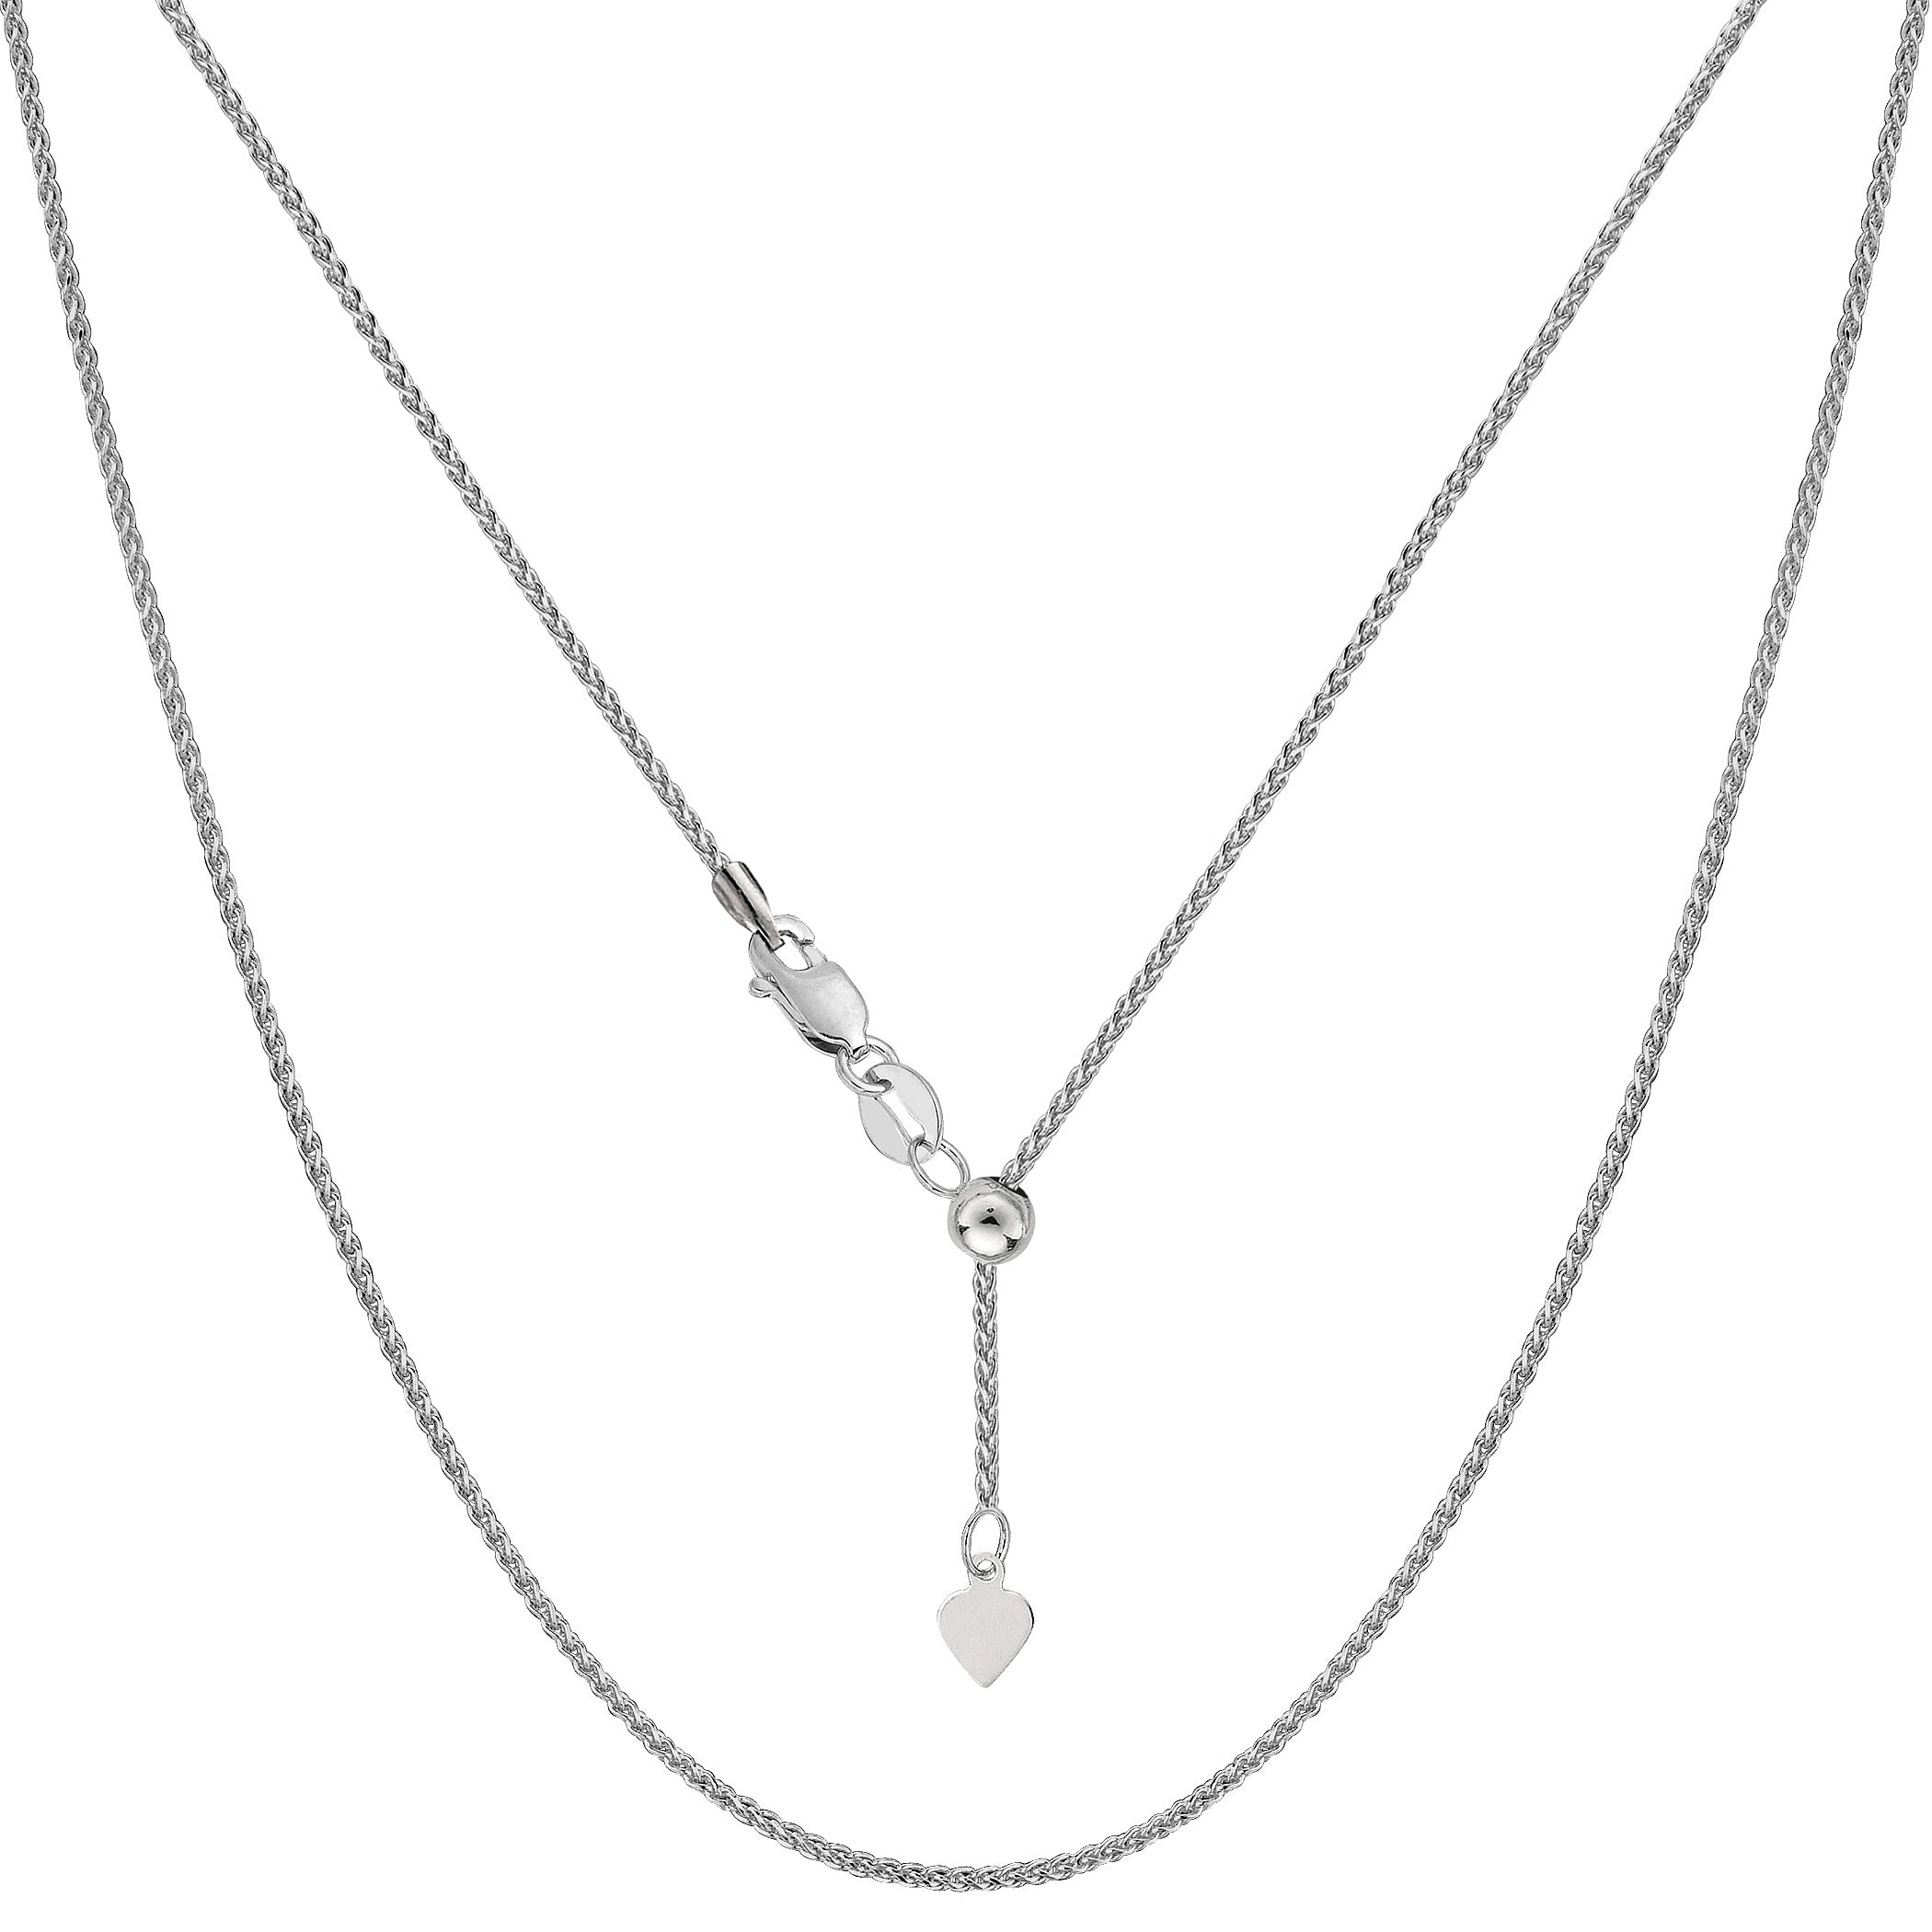 10k White Gold Adjustable Wheat Link Chain Necklace, 1.0mm, 22"